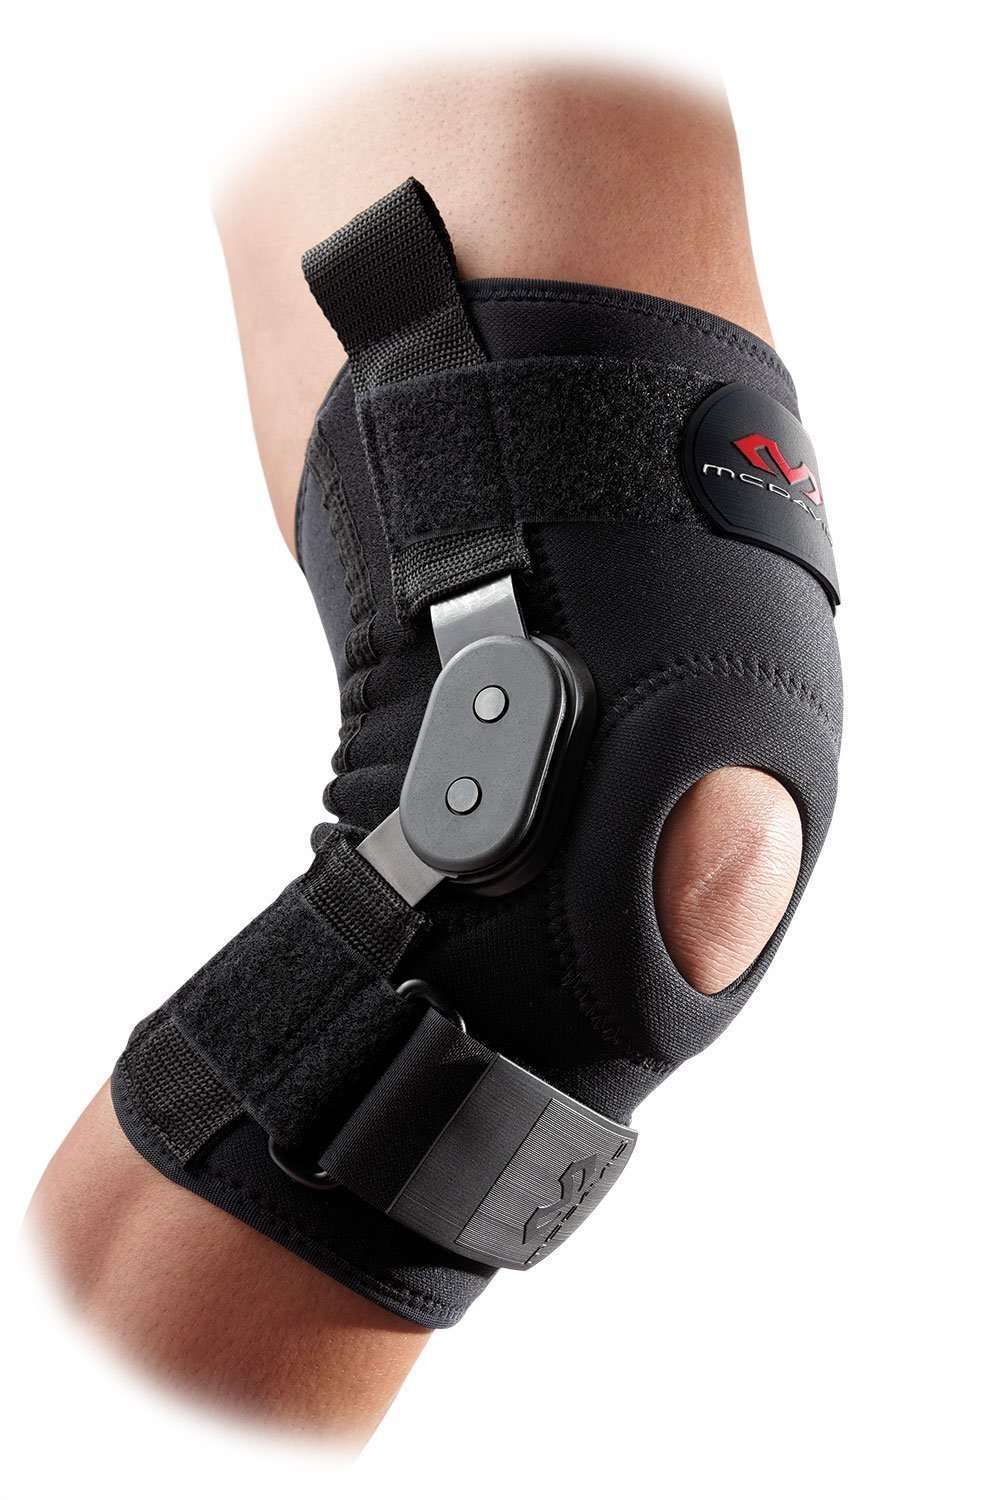 Knee pads usage in sports